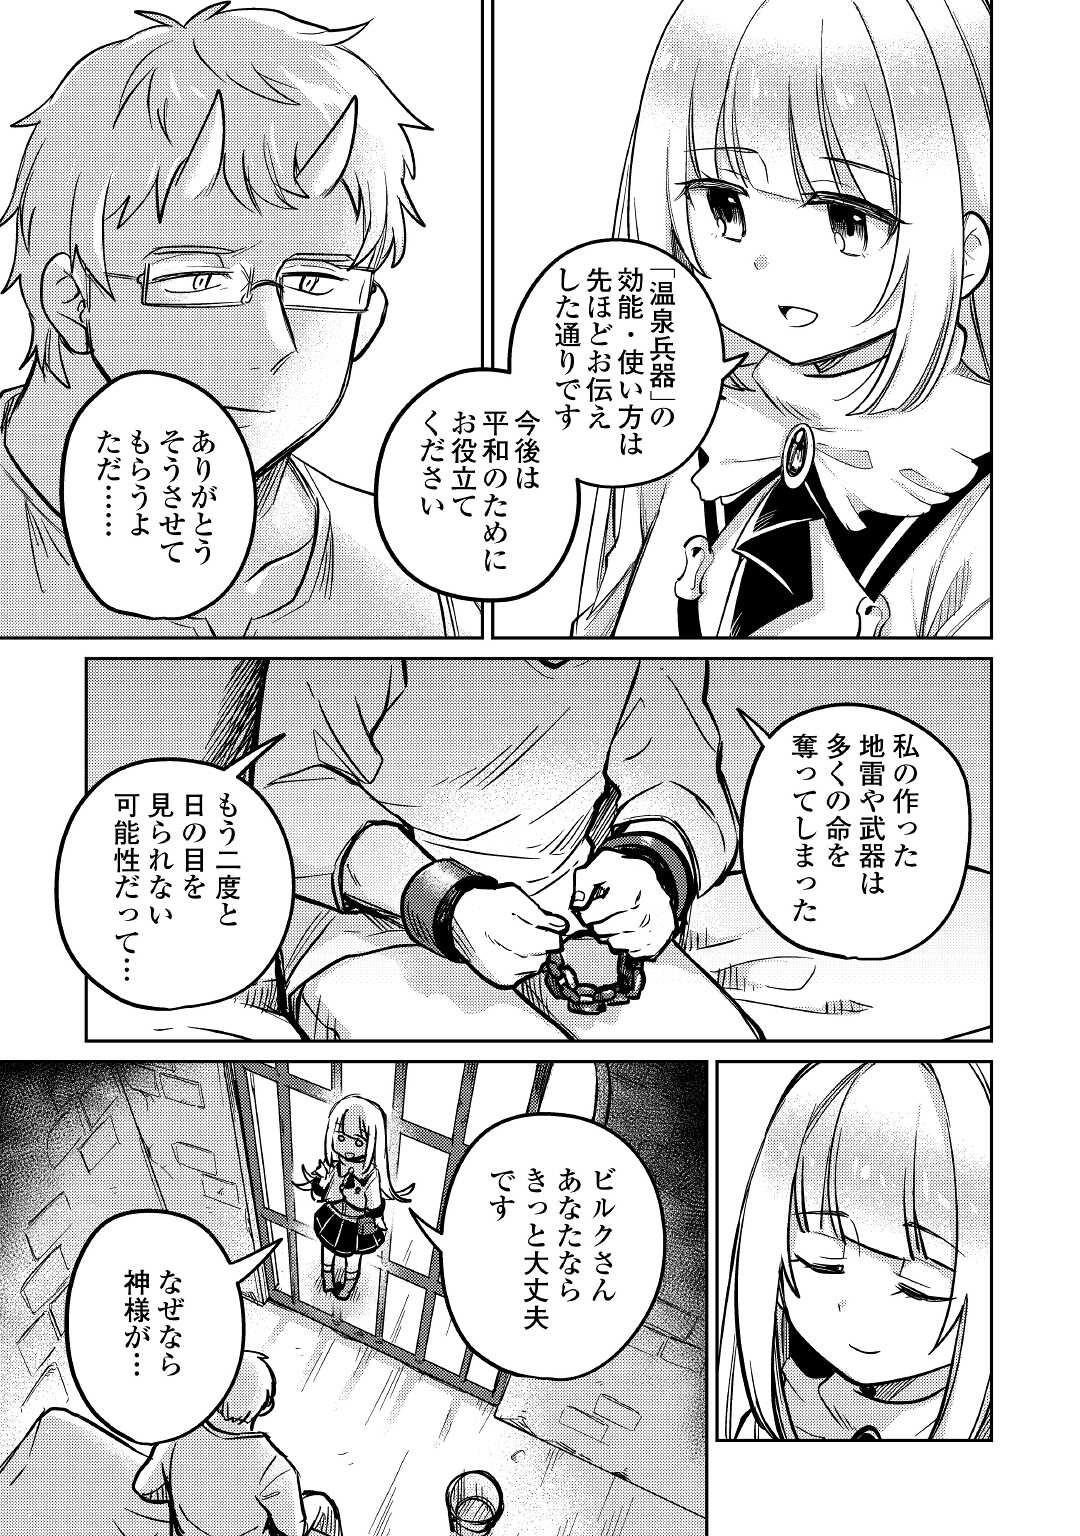 The Former Structural Researcher’s Story of Otherworldly Adventure 第40話 - Page 23